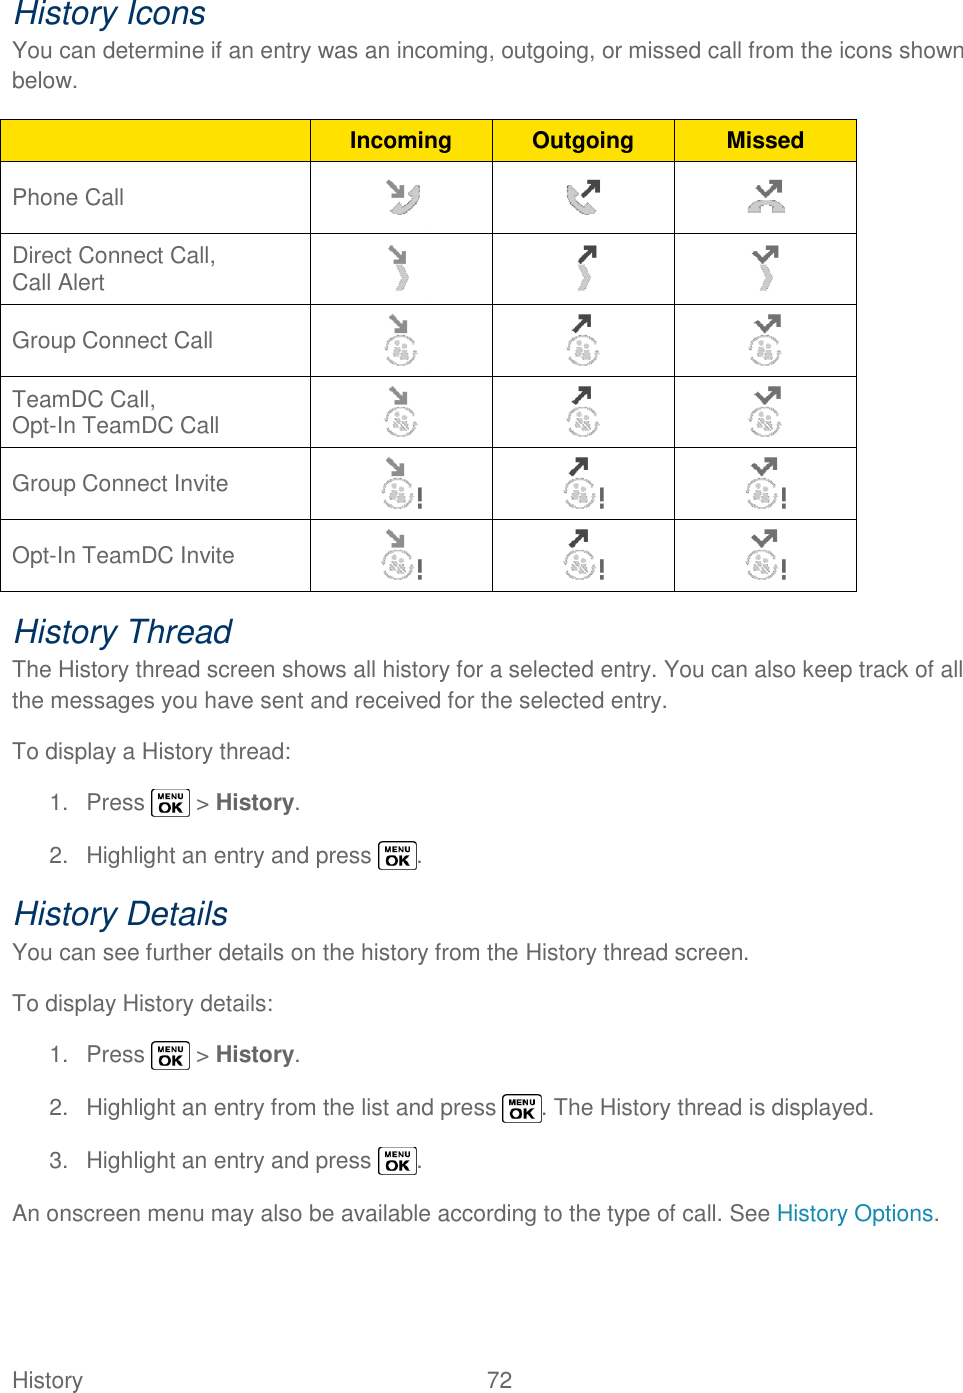  History   72   History Icons You can determine if an entry was an incoming, outgoing, or missed call from the icons shown below.  Incoming Outgoing Missed Phone Call    Direct Connect Call, Call Alert    Group Connect Call    TeamDC Call, Opt-In TeamDC Call    Group Connect Invite    Opt-In TeamDC Invite    History Thread The History thread screen shows all history for a selected entry. You can also keep track of all the messages you have sent and received for the selected entry. To display a History thread: 1.  Press   &gt; History. 2.  Highlight an entry and press  . History Details You can see further details on the history from the History thread screen. To display History details: 1.  Press   &gt; History. 2.  Highlight an entry from the list and press  . The History thread is displayed. 3.  Highlight an entry and press  . An onscreen menu may also be available according to the type of call. See History Options. 